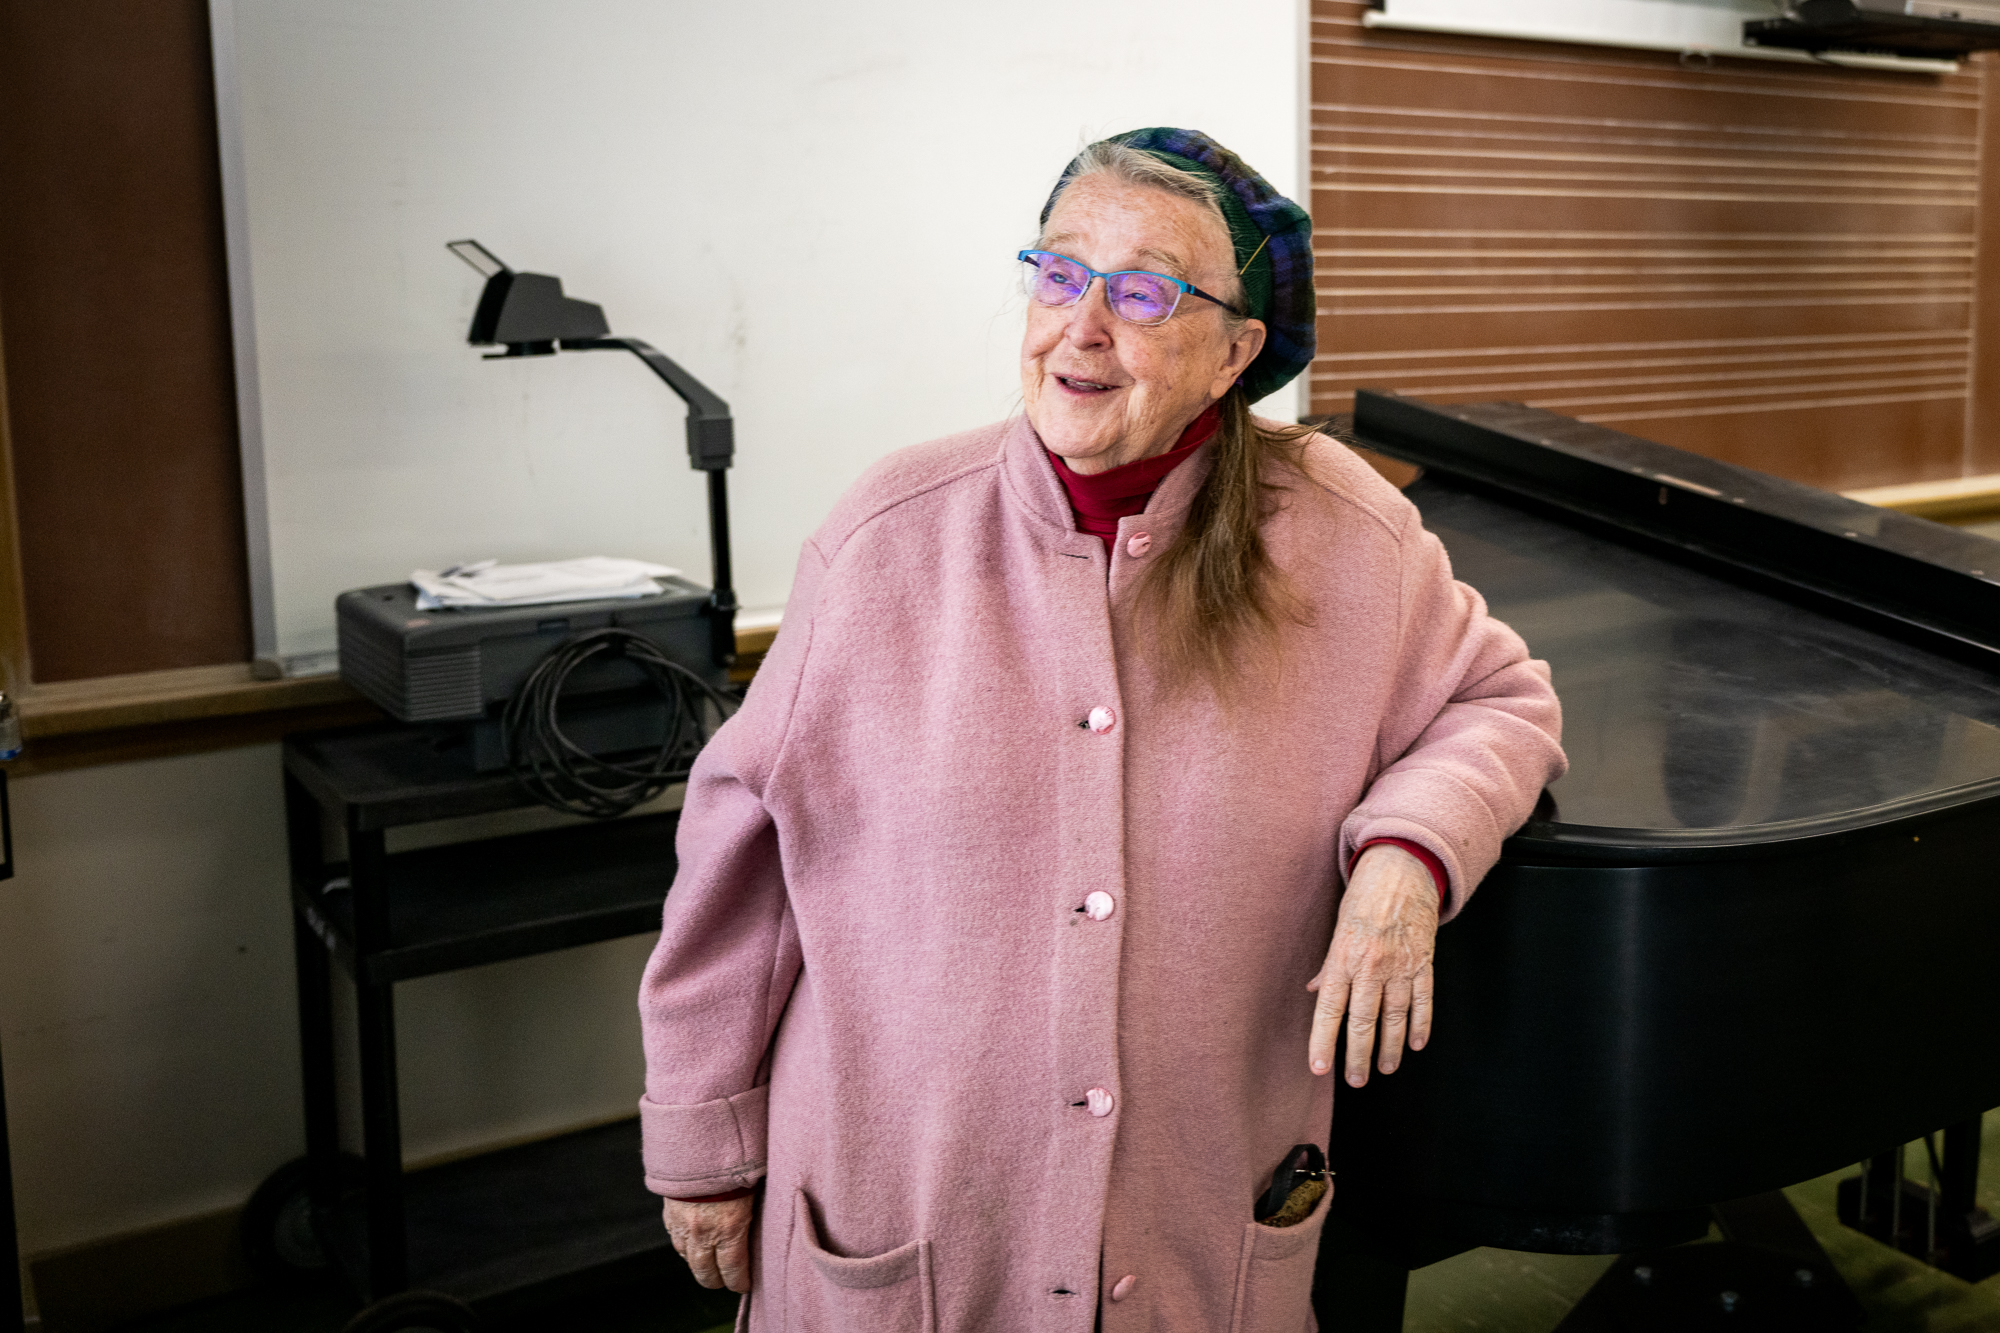 An older woman wearing glasses and a pink coat smiles as she leans on a grand piano